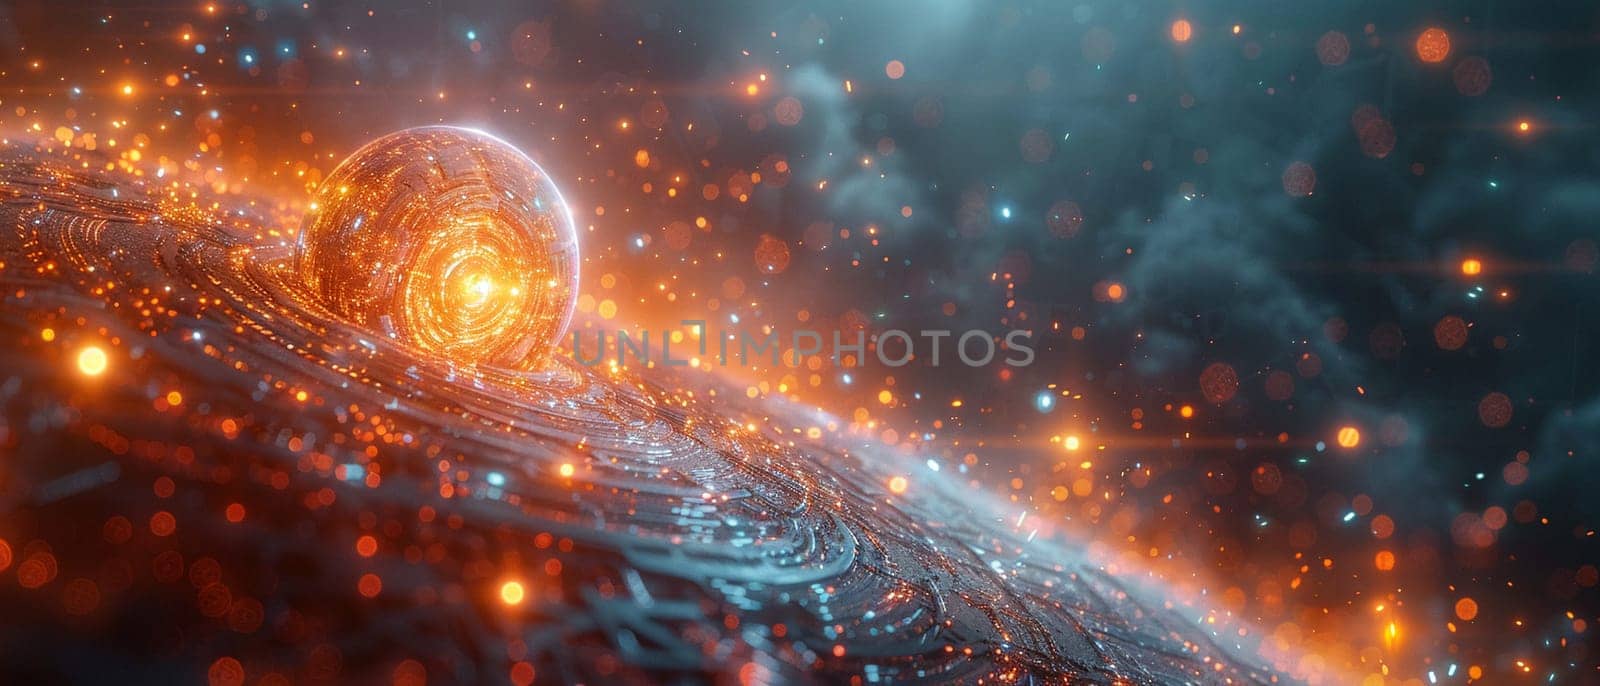 Electricity sparking between two futuristic devices, illustration with dynamic effects and a sense of power.